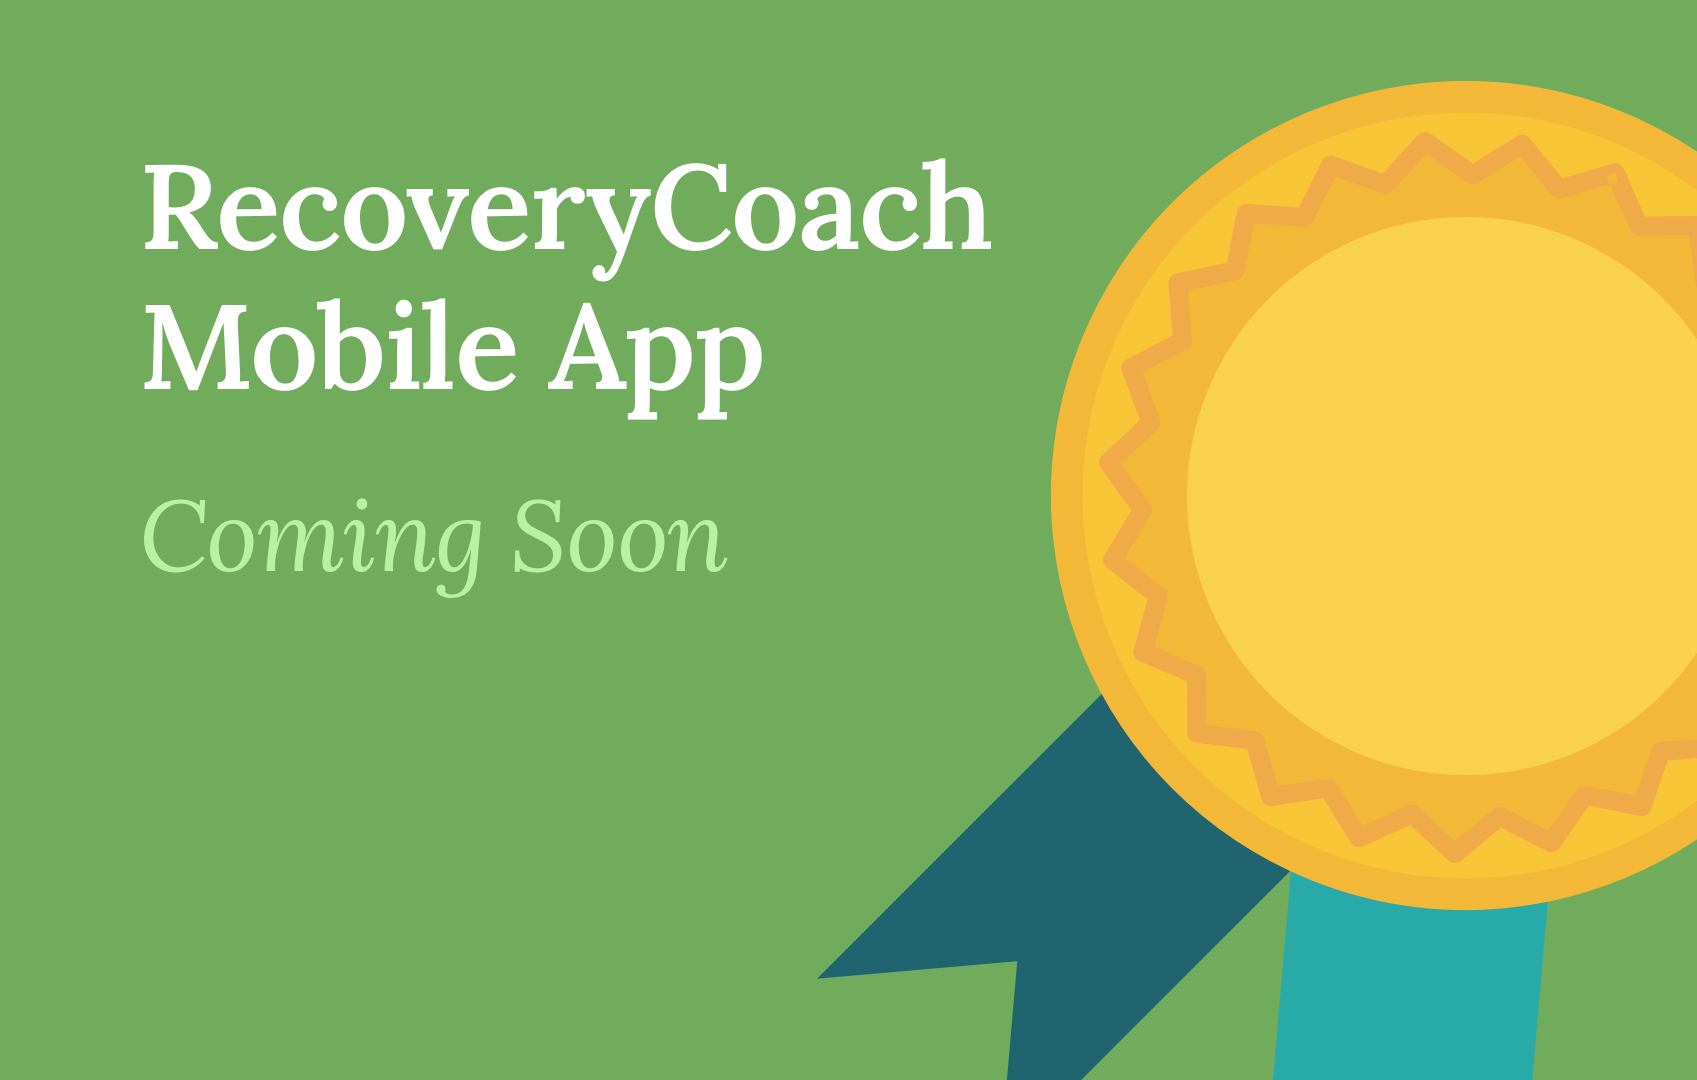 RecoveryCoach Mobile App (Coming Soon)